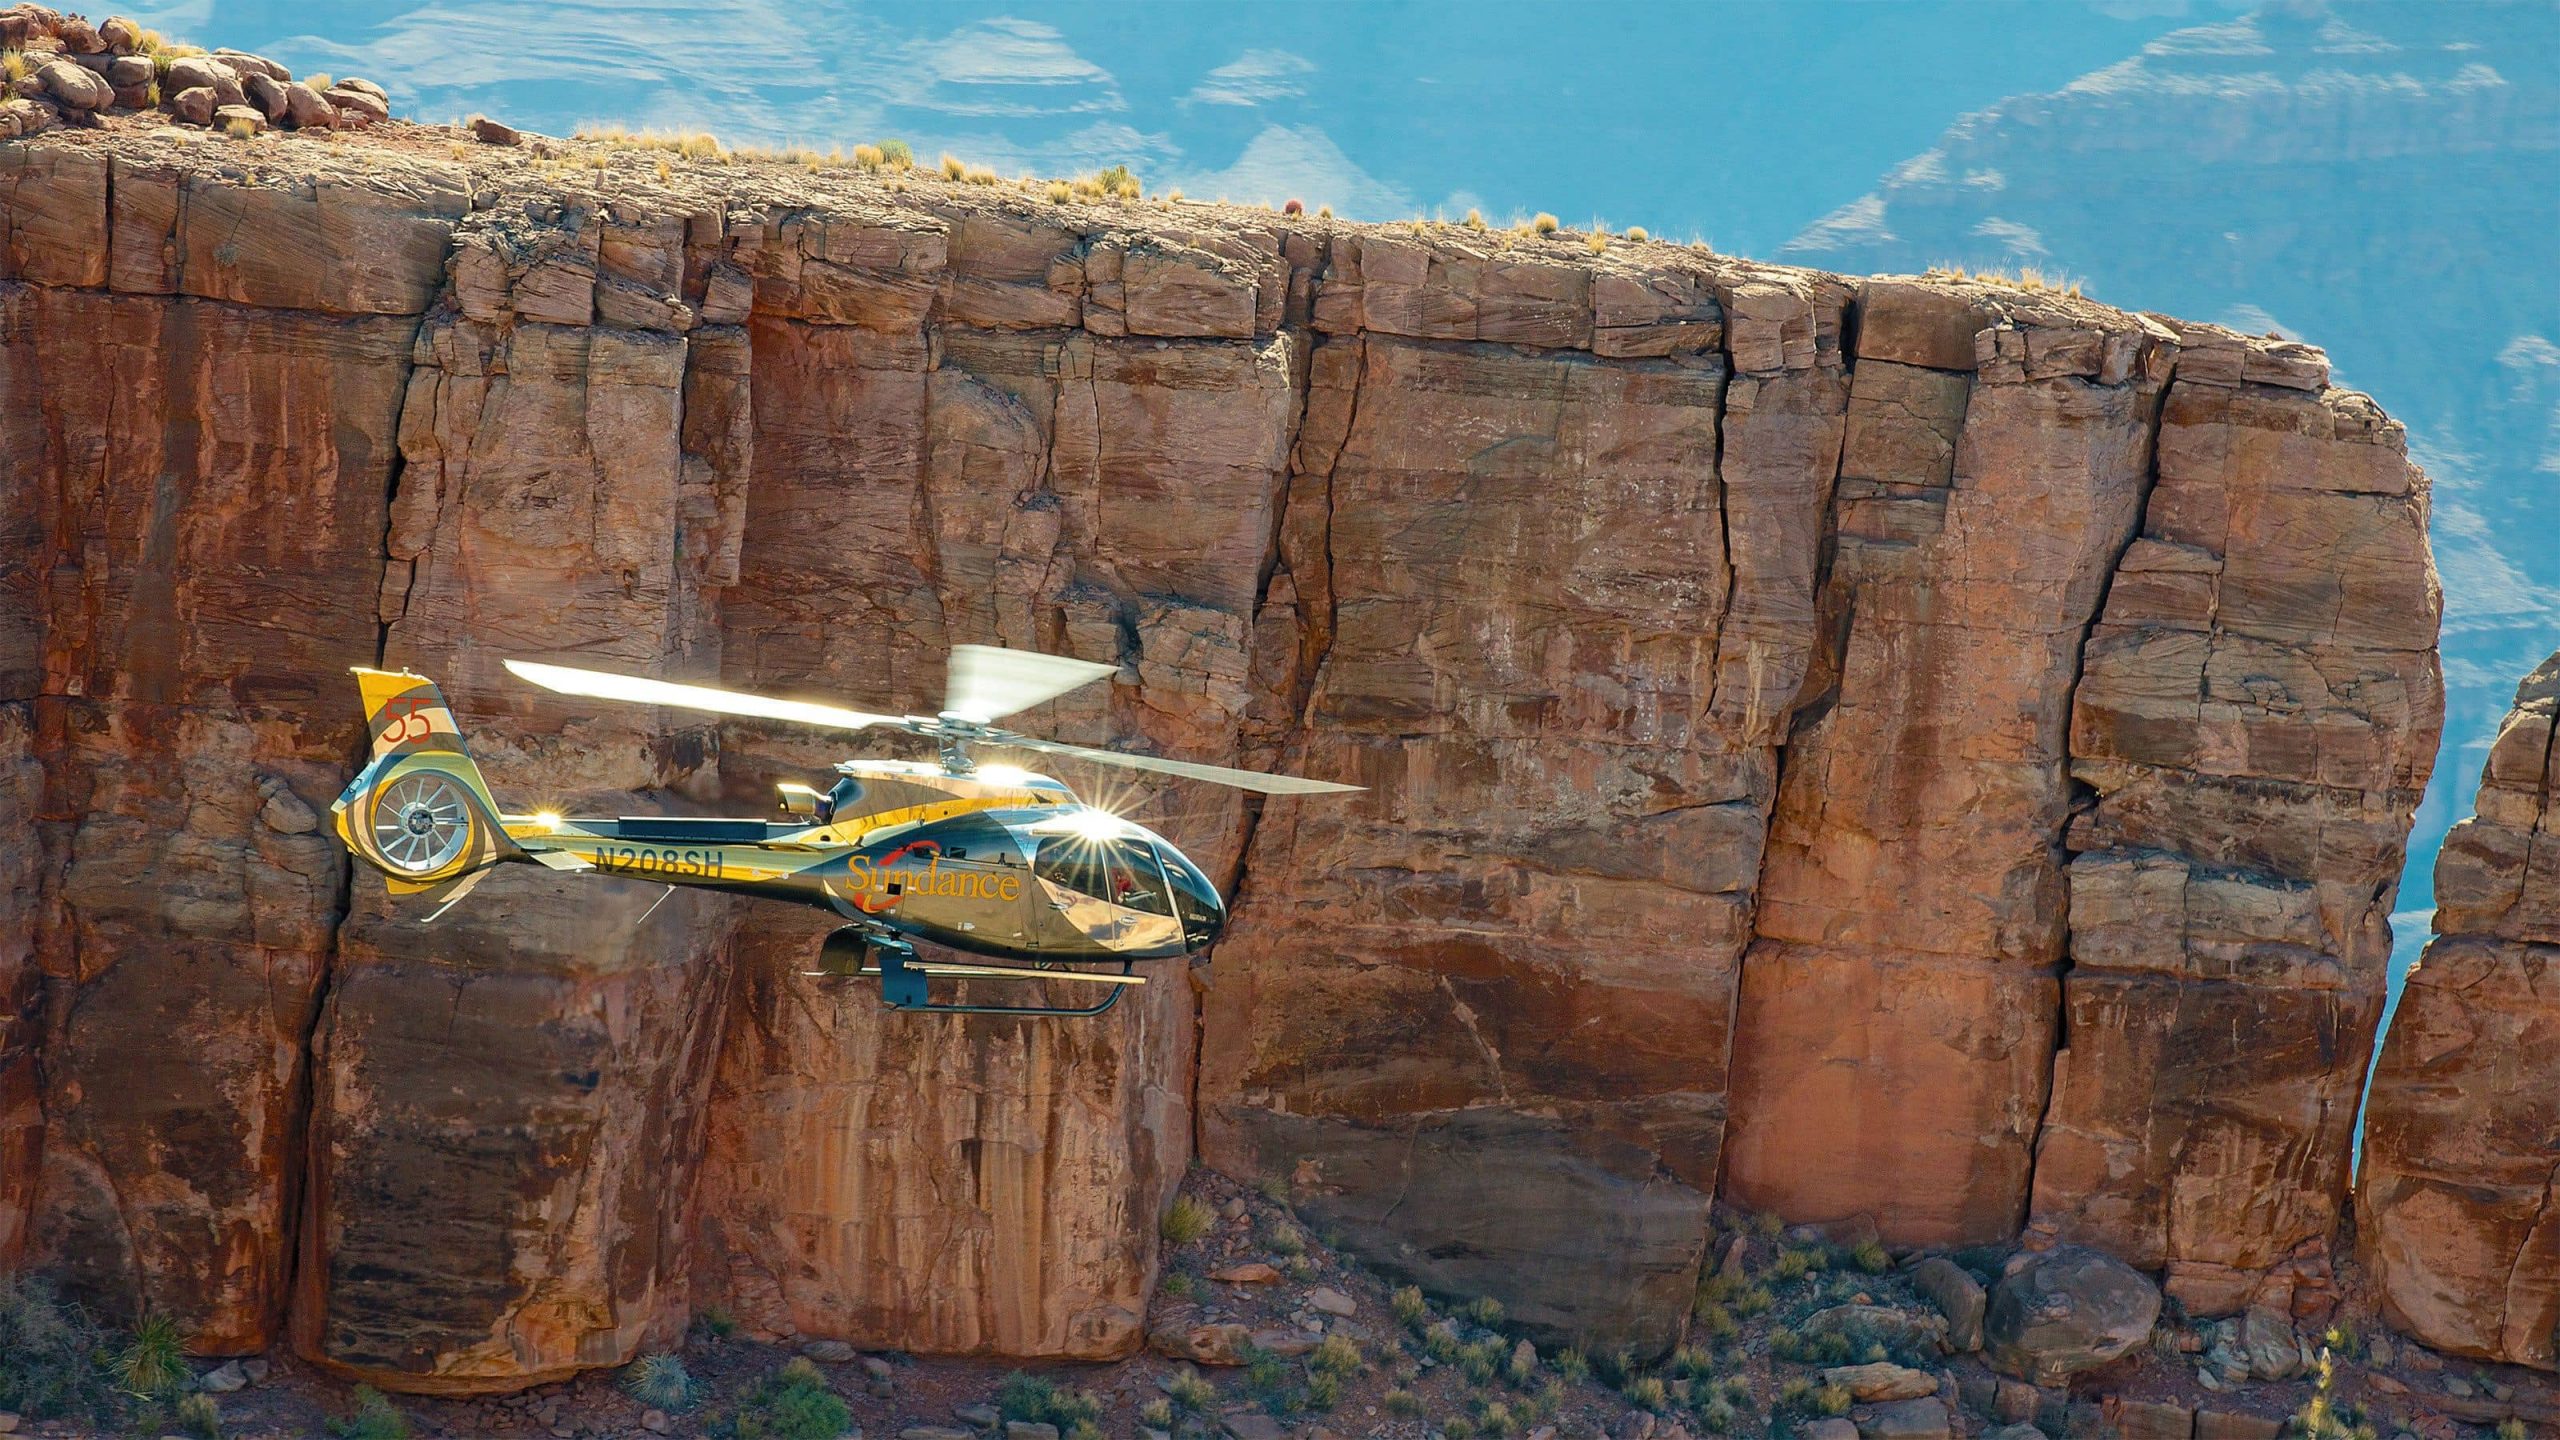 Golden helicopter ride to the Grand Canyon from Las Vegas